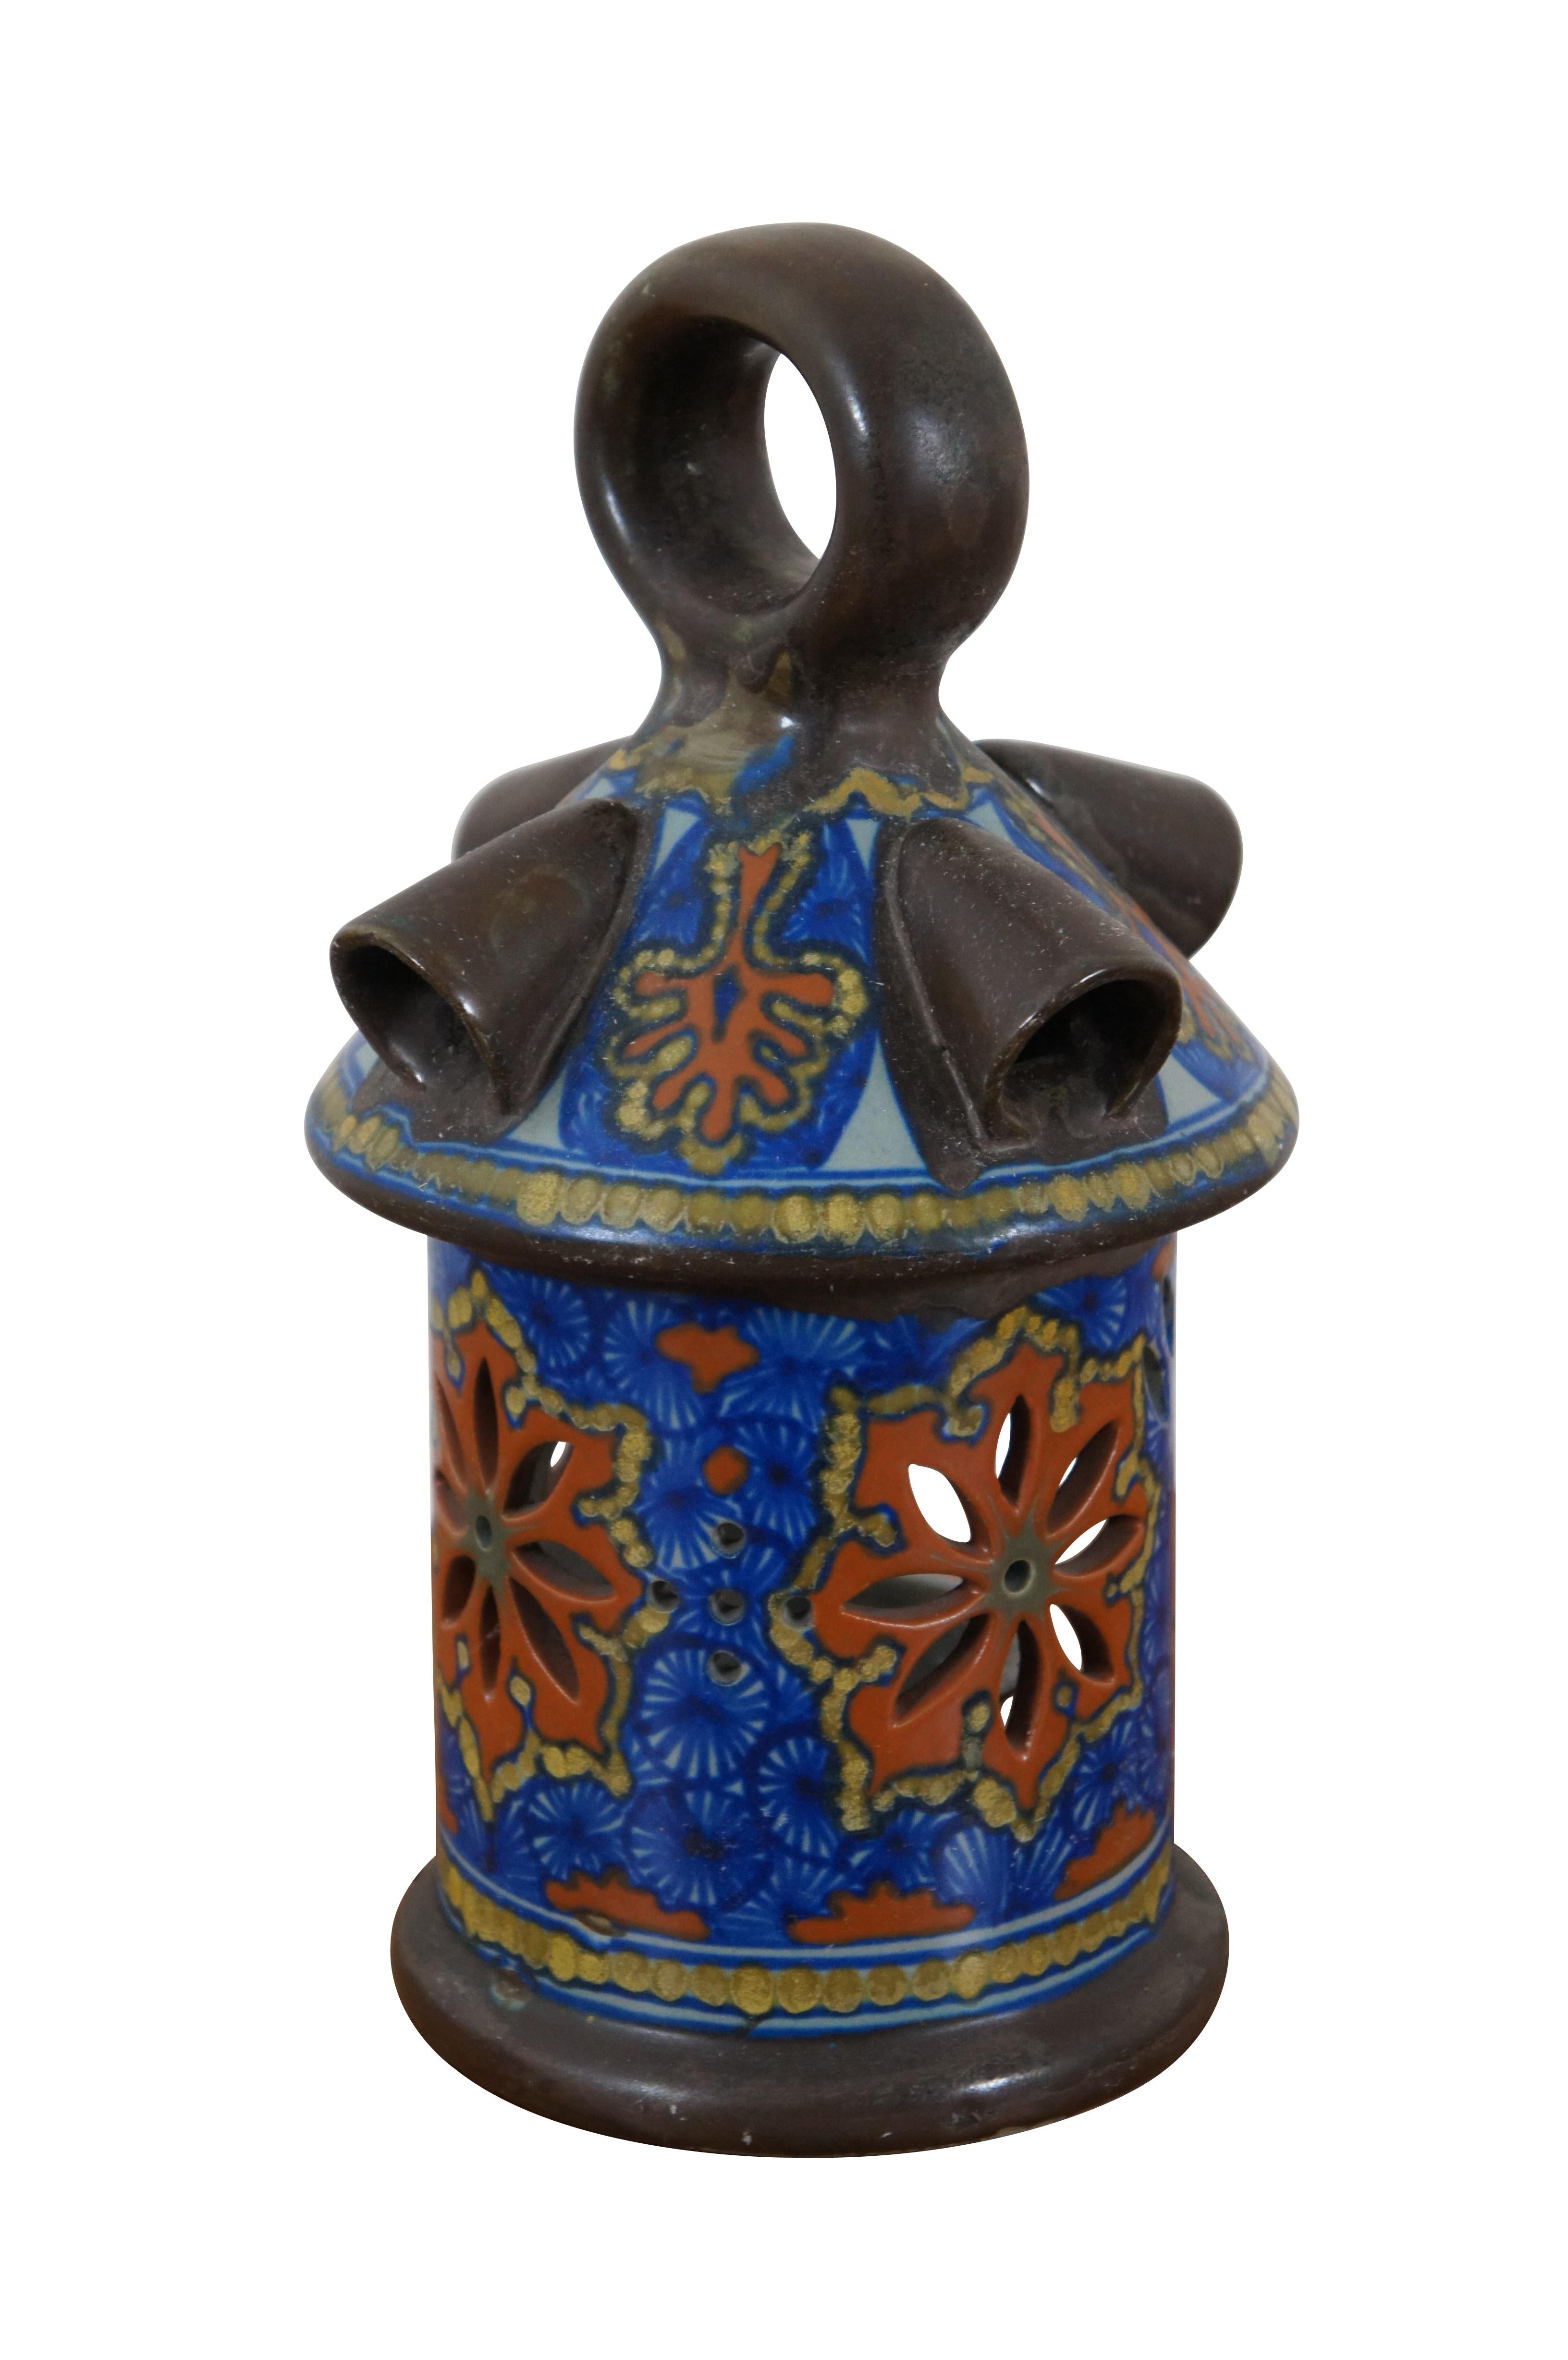 Antique Gouda a Jour Dutch pottery candle lantern, hand painted in brown, blue and orange. Houses a tea light sized votive candle. Made in Holland for Marquise de Sevigne Rouzand.

Dimensions:
5.5